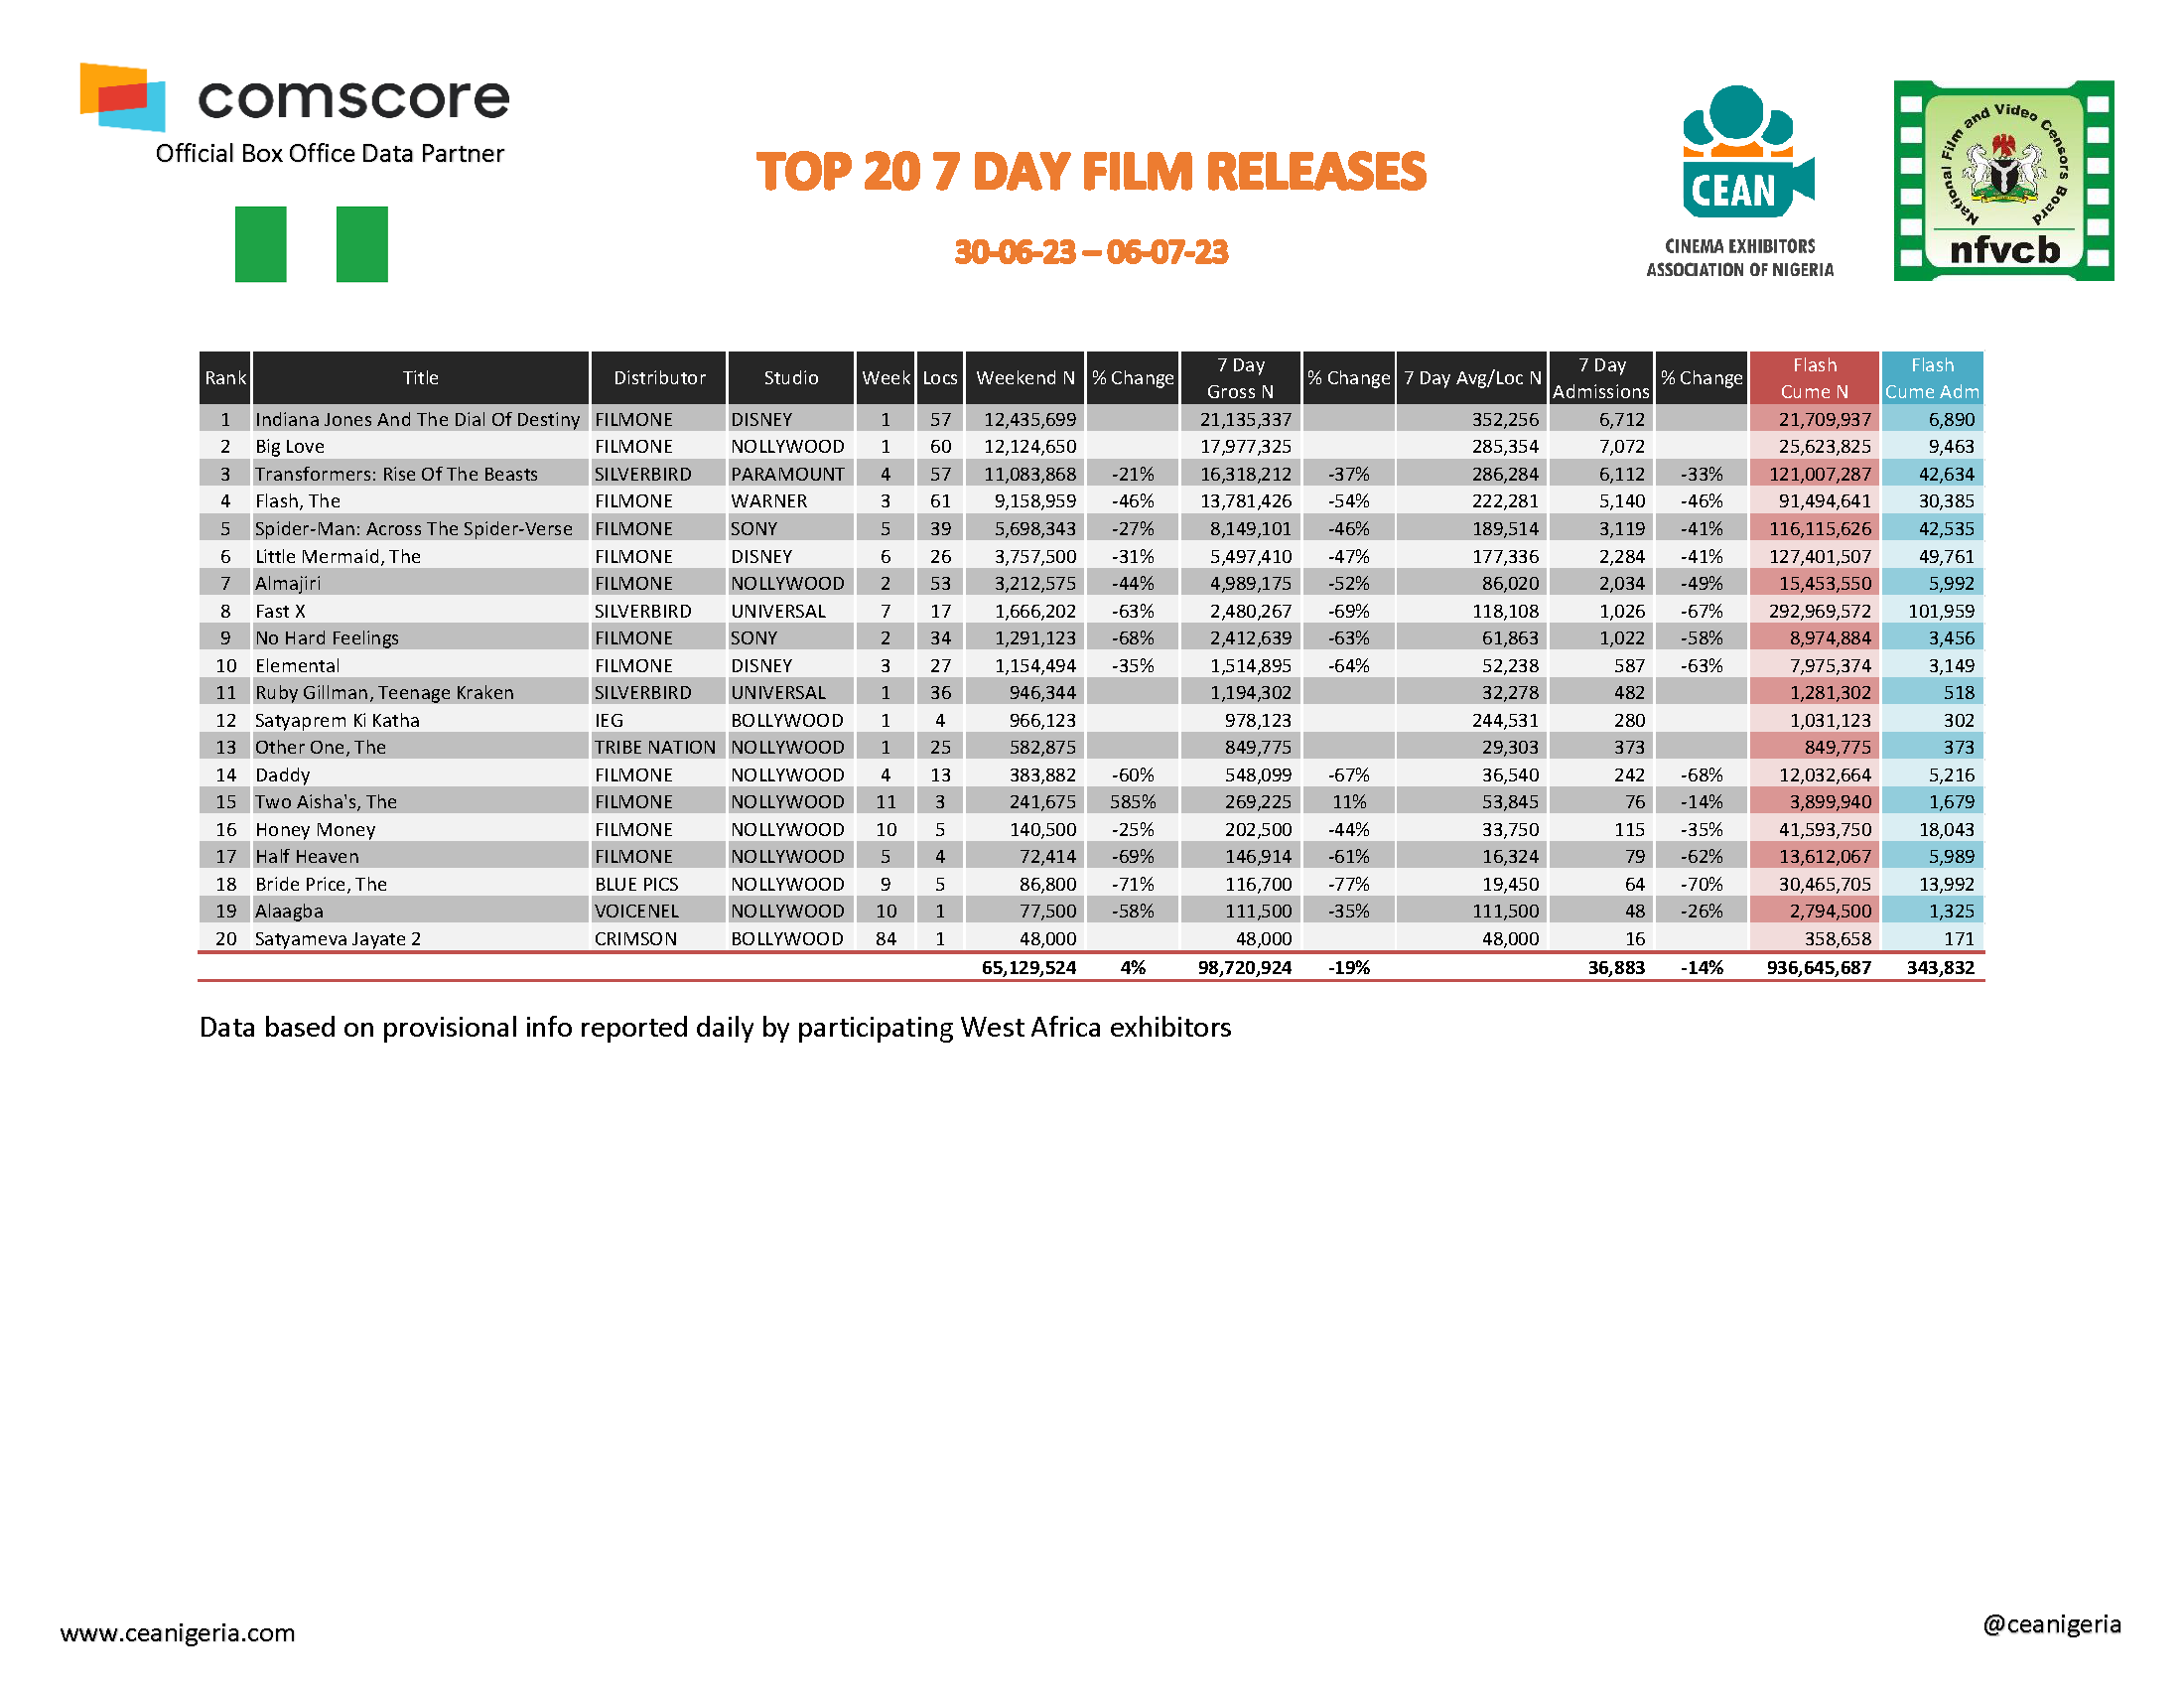 Top 20 films 7 Day 30th June 6th July